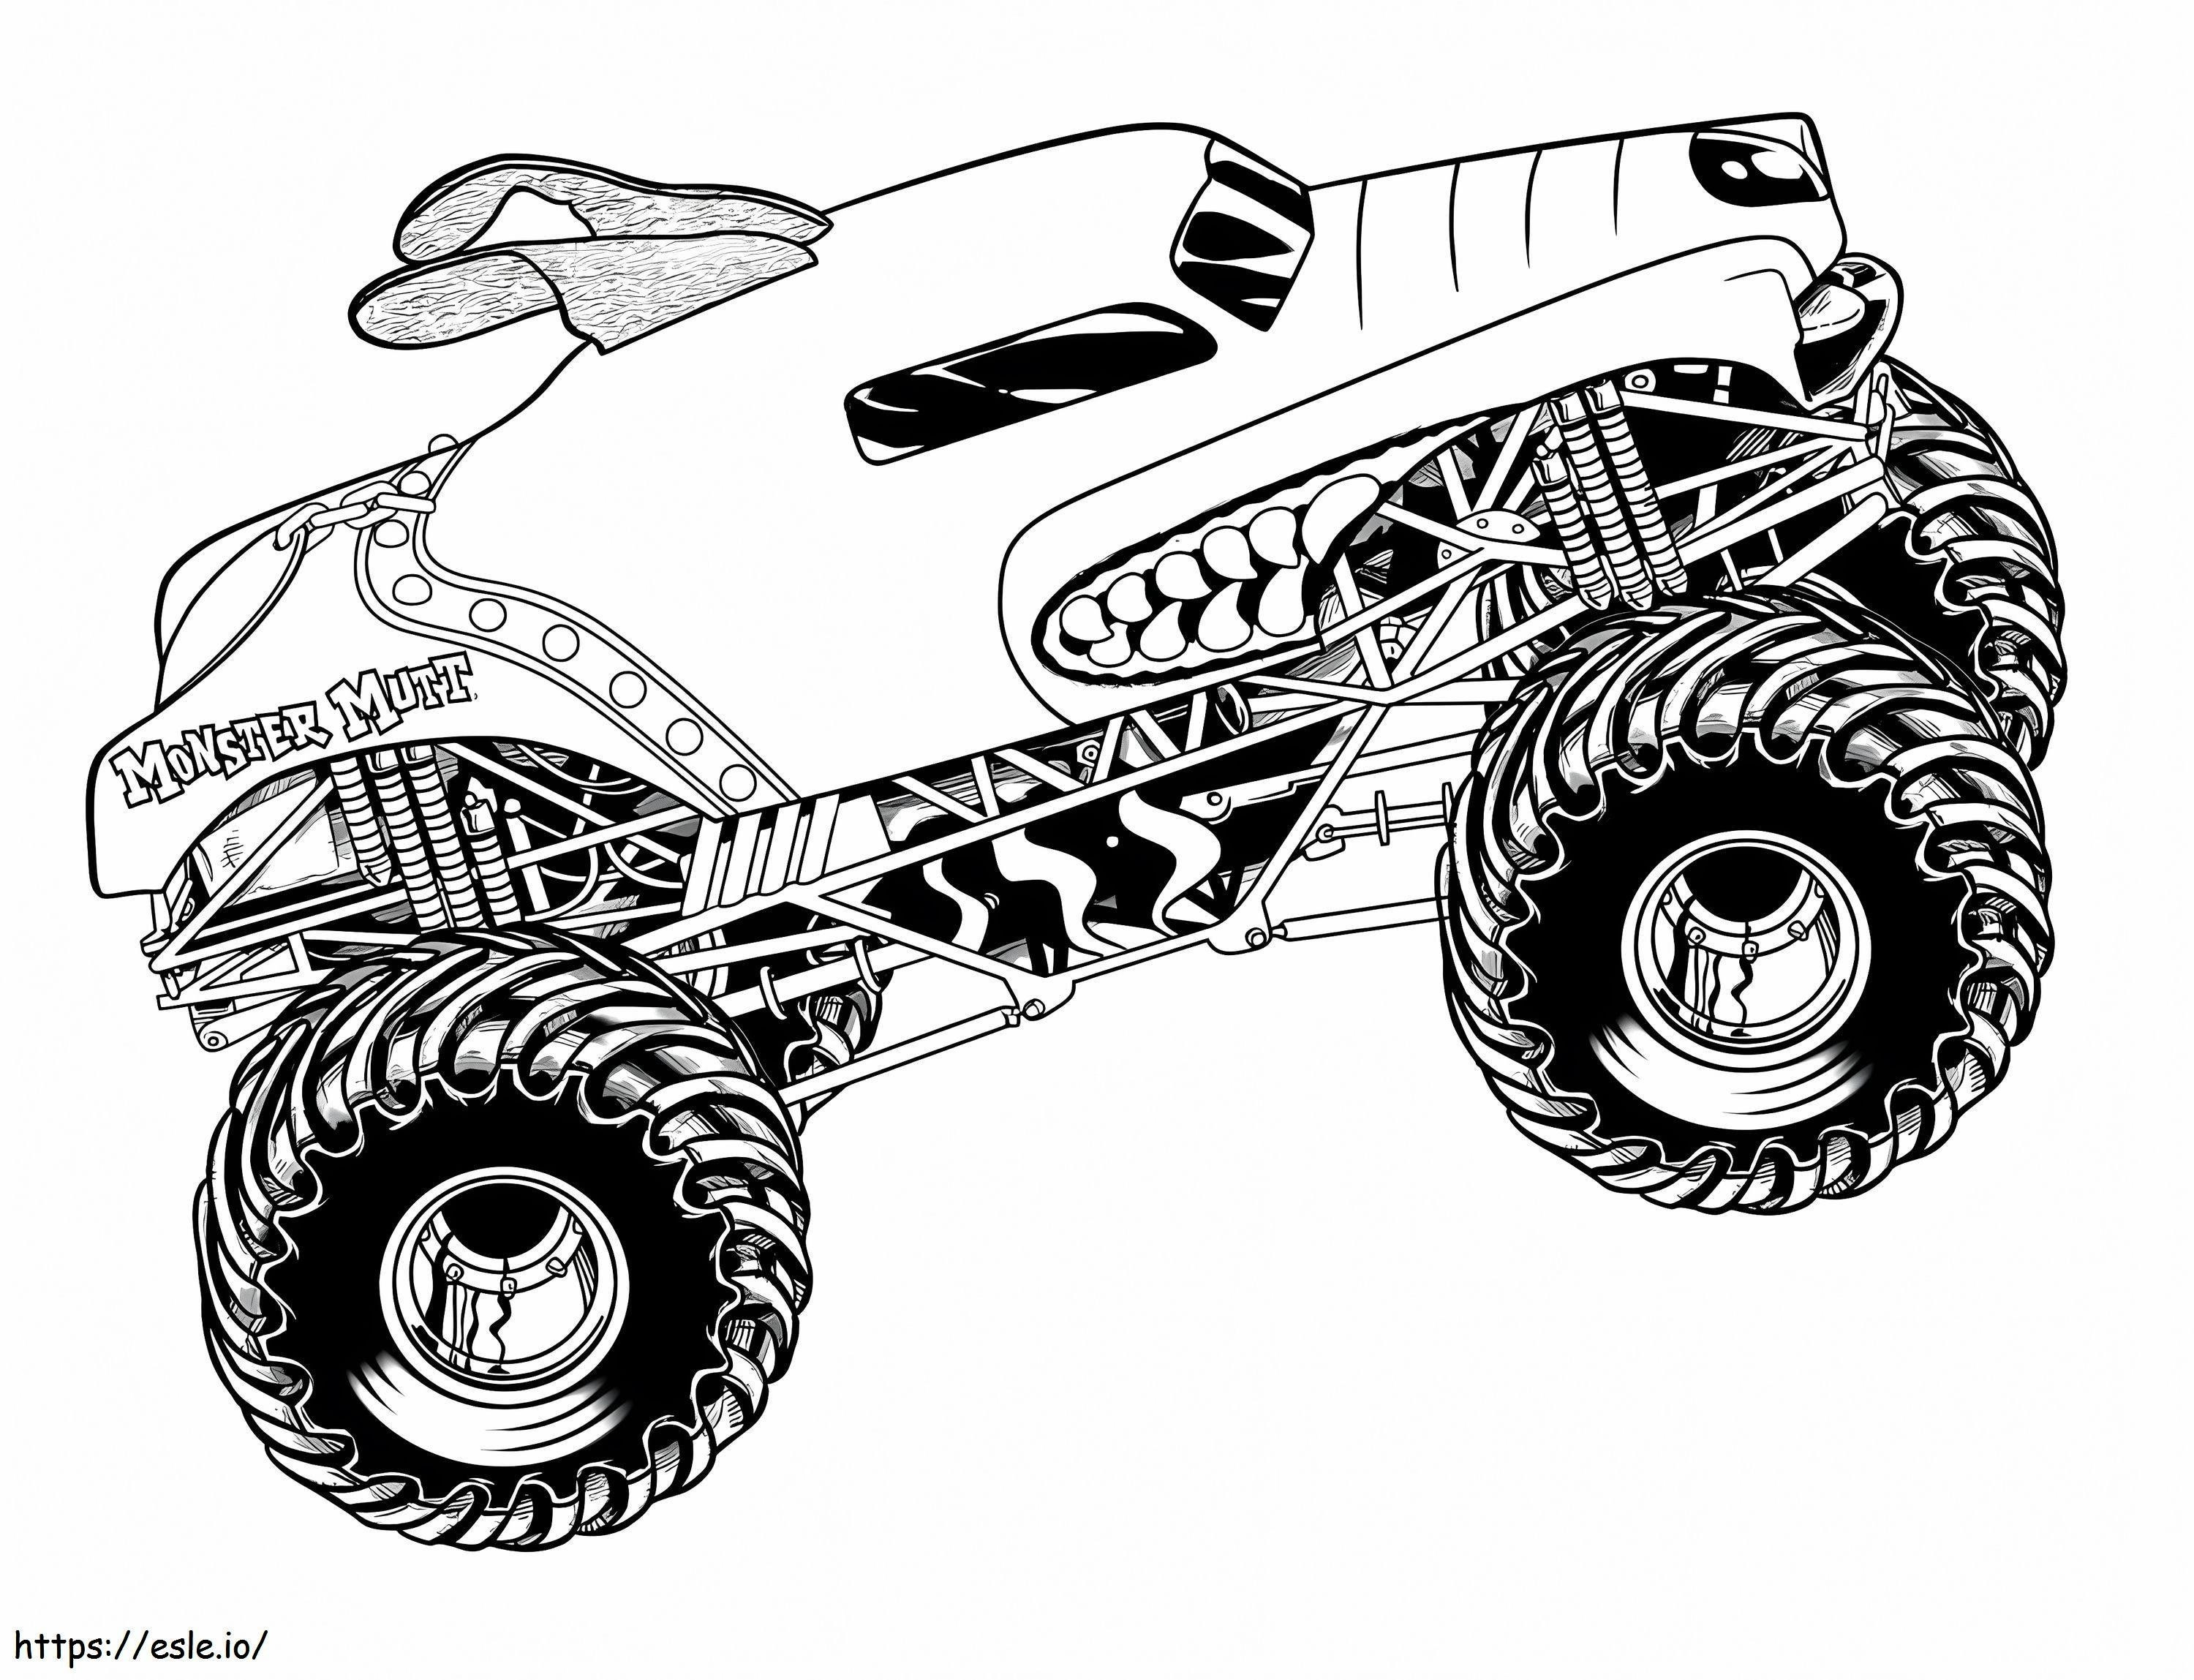 Monster Chucho Monster Truck coloring page